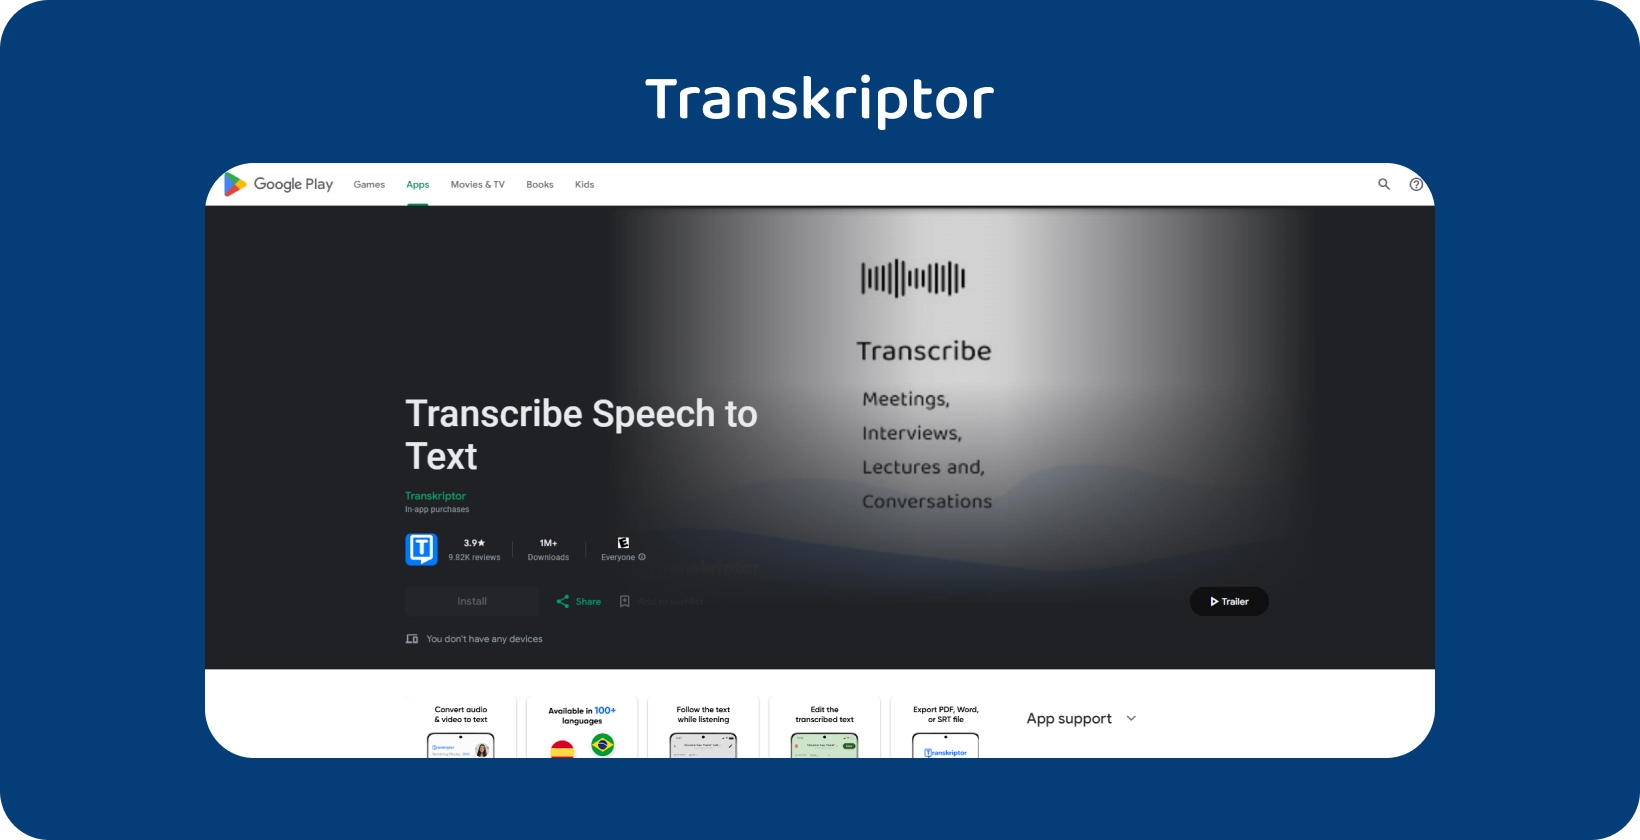 Transkriptor on Google Play, an app for transcribing speech to text, ideal for meetings and lectures.